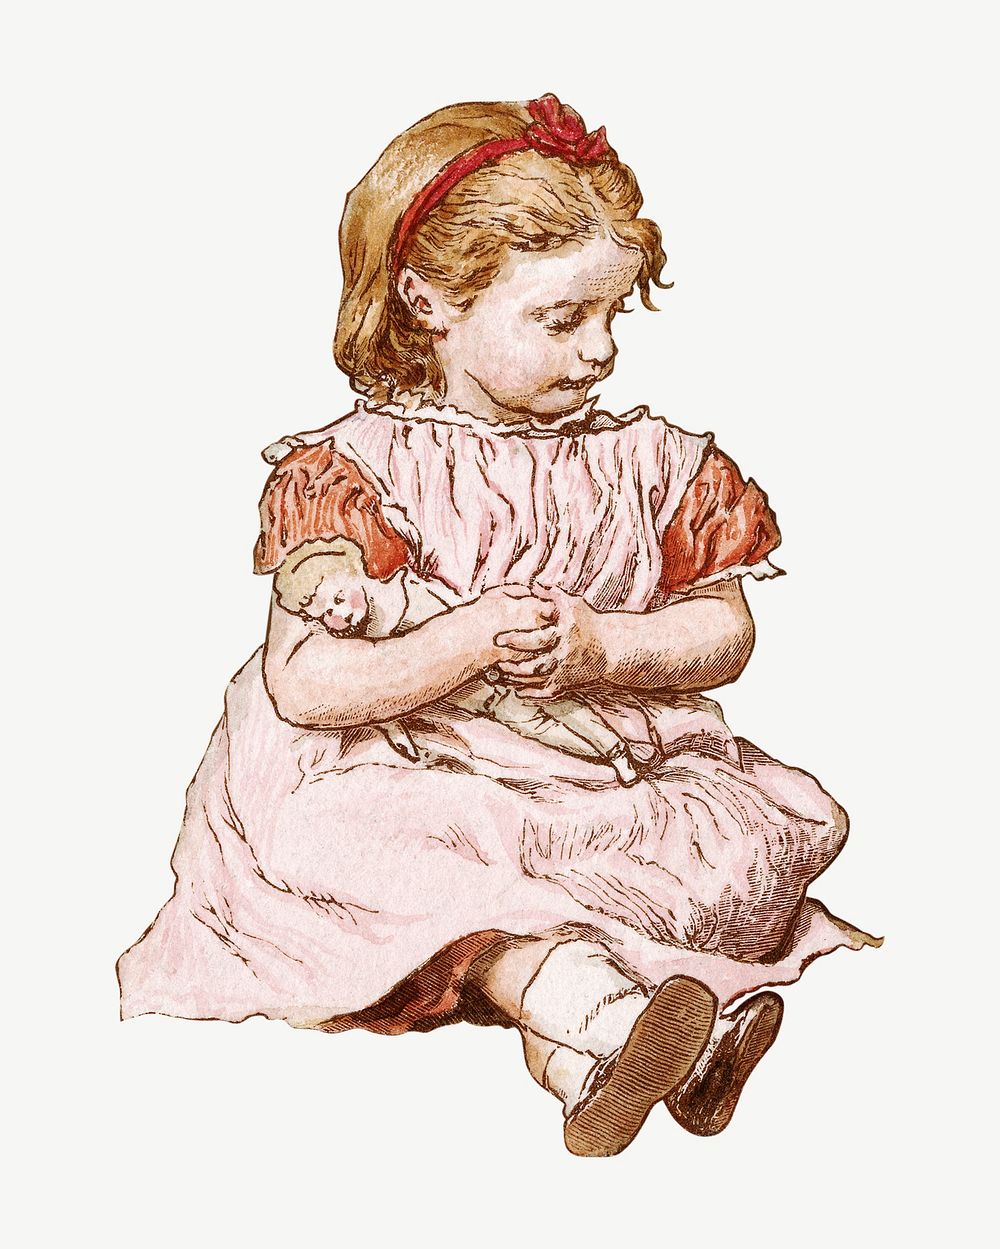 Little girl sitting illustration psd. Remixed by rawpixel.